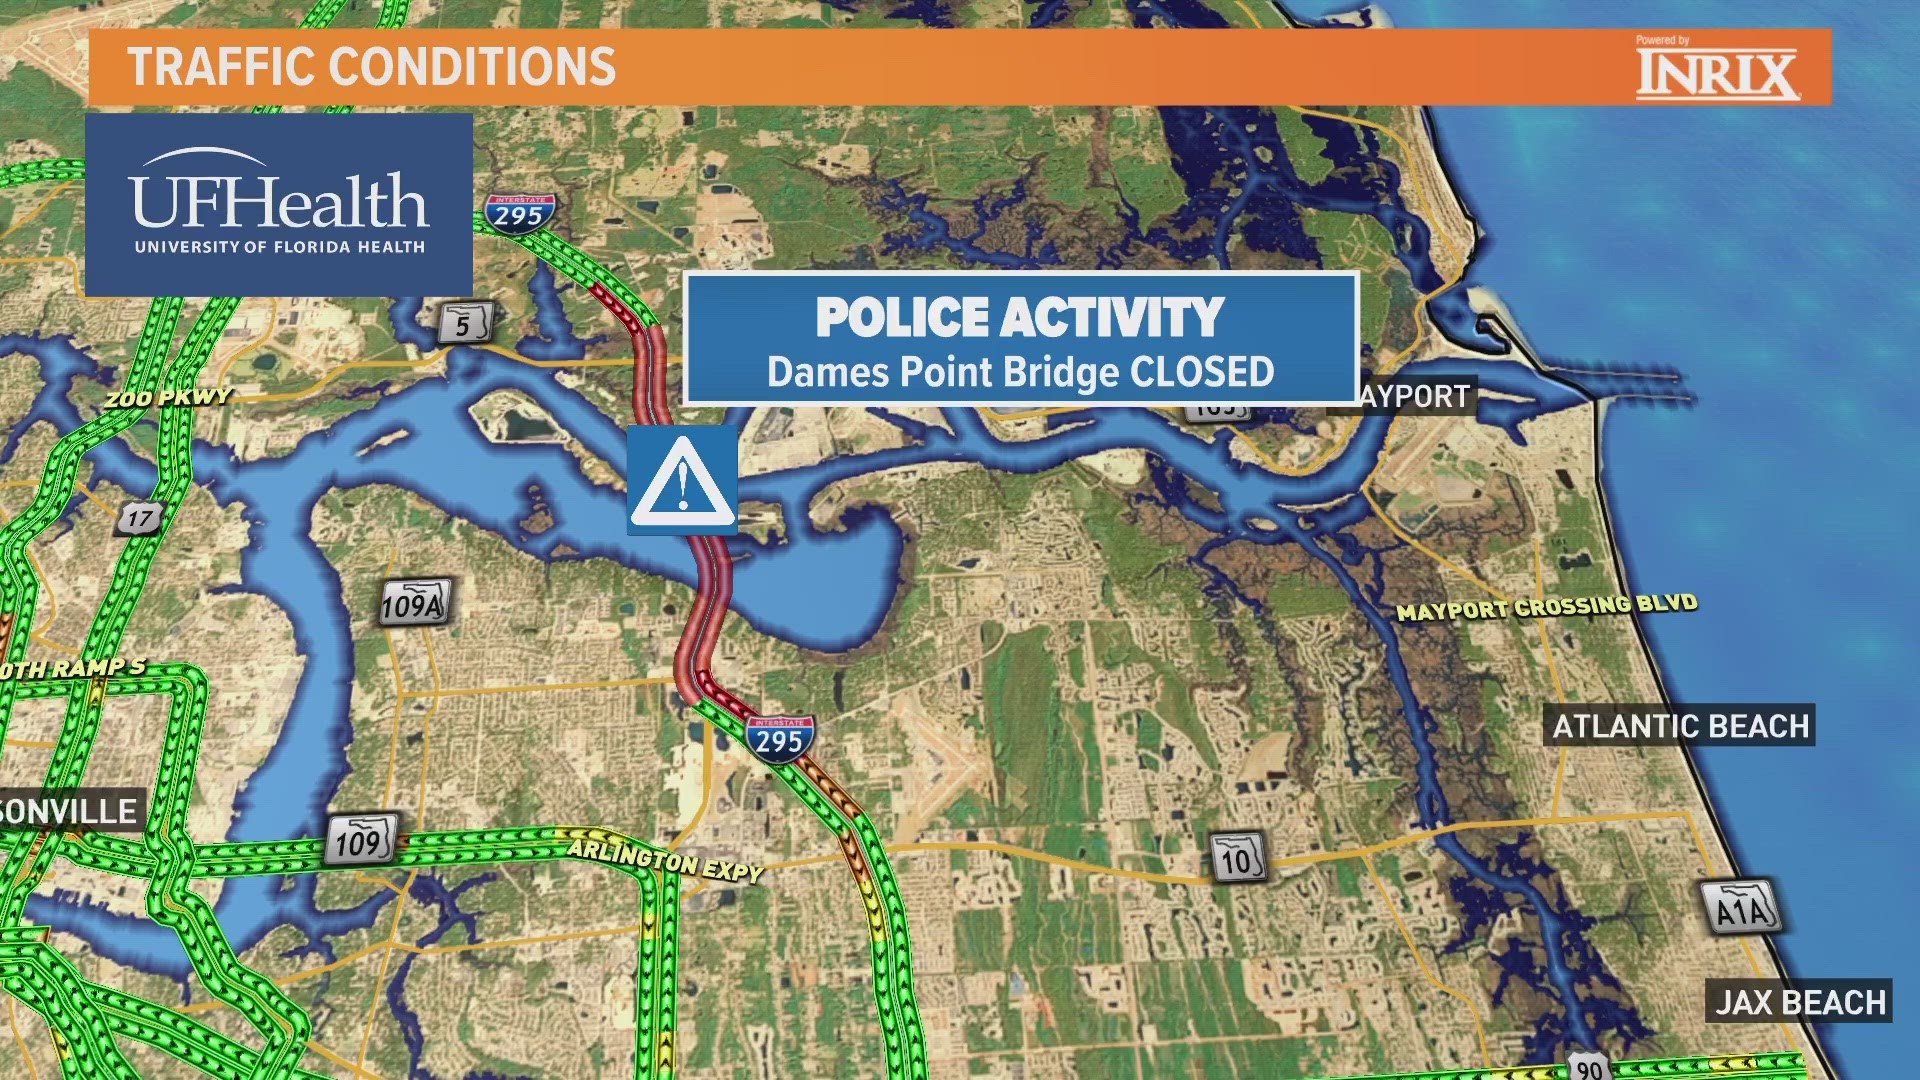 The Dames Point Bridge is closed due to police activity.